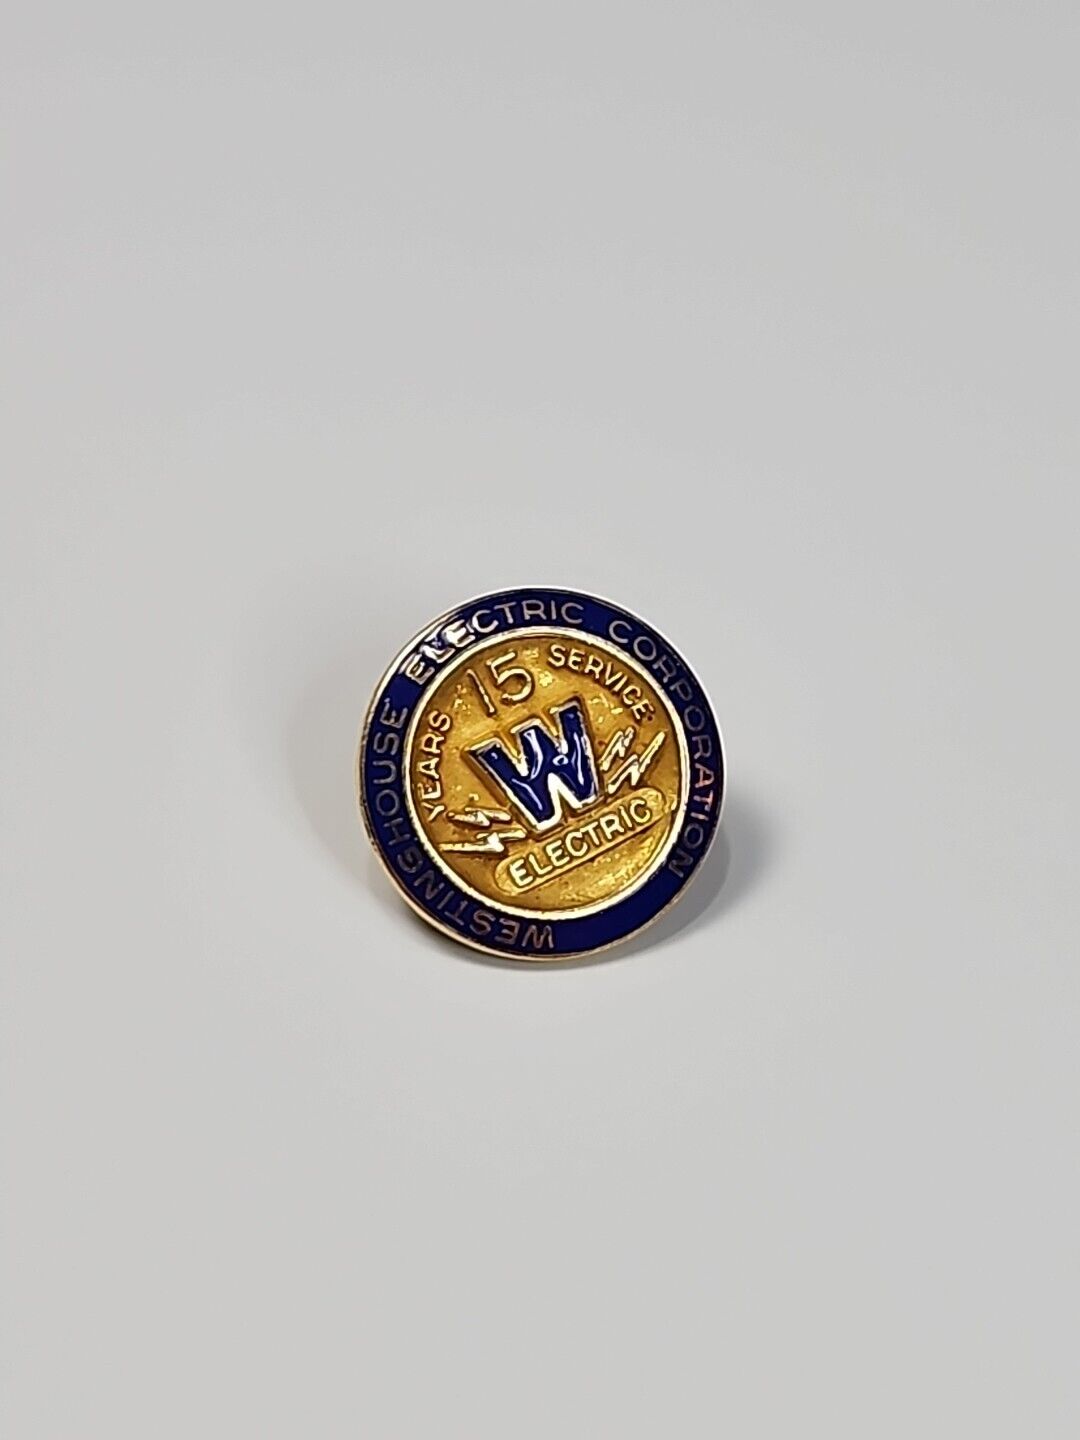 Westinghouse Electric 15 Year Employee Service Award Pin Screw-Back Vintage*